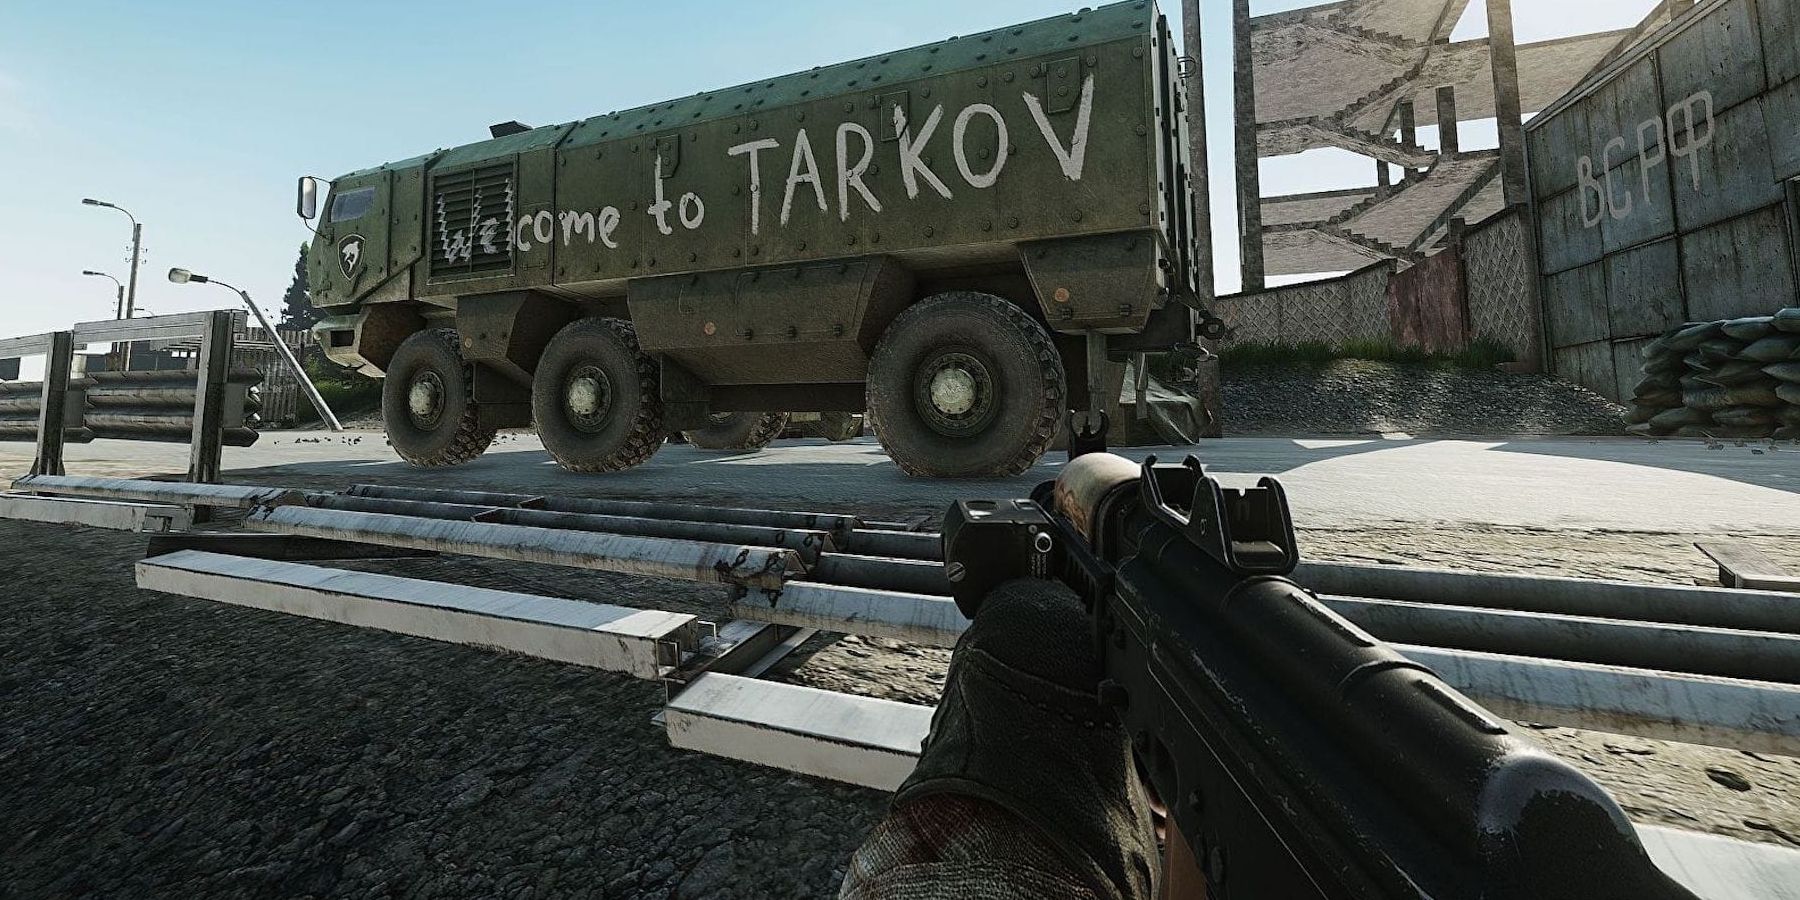 welcome to tarkov truck